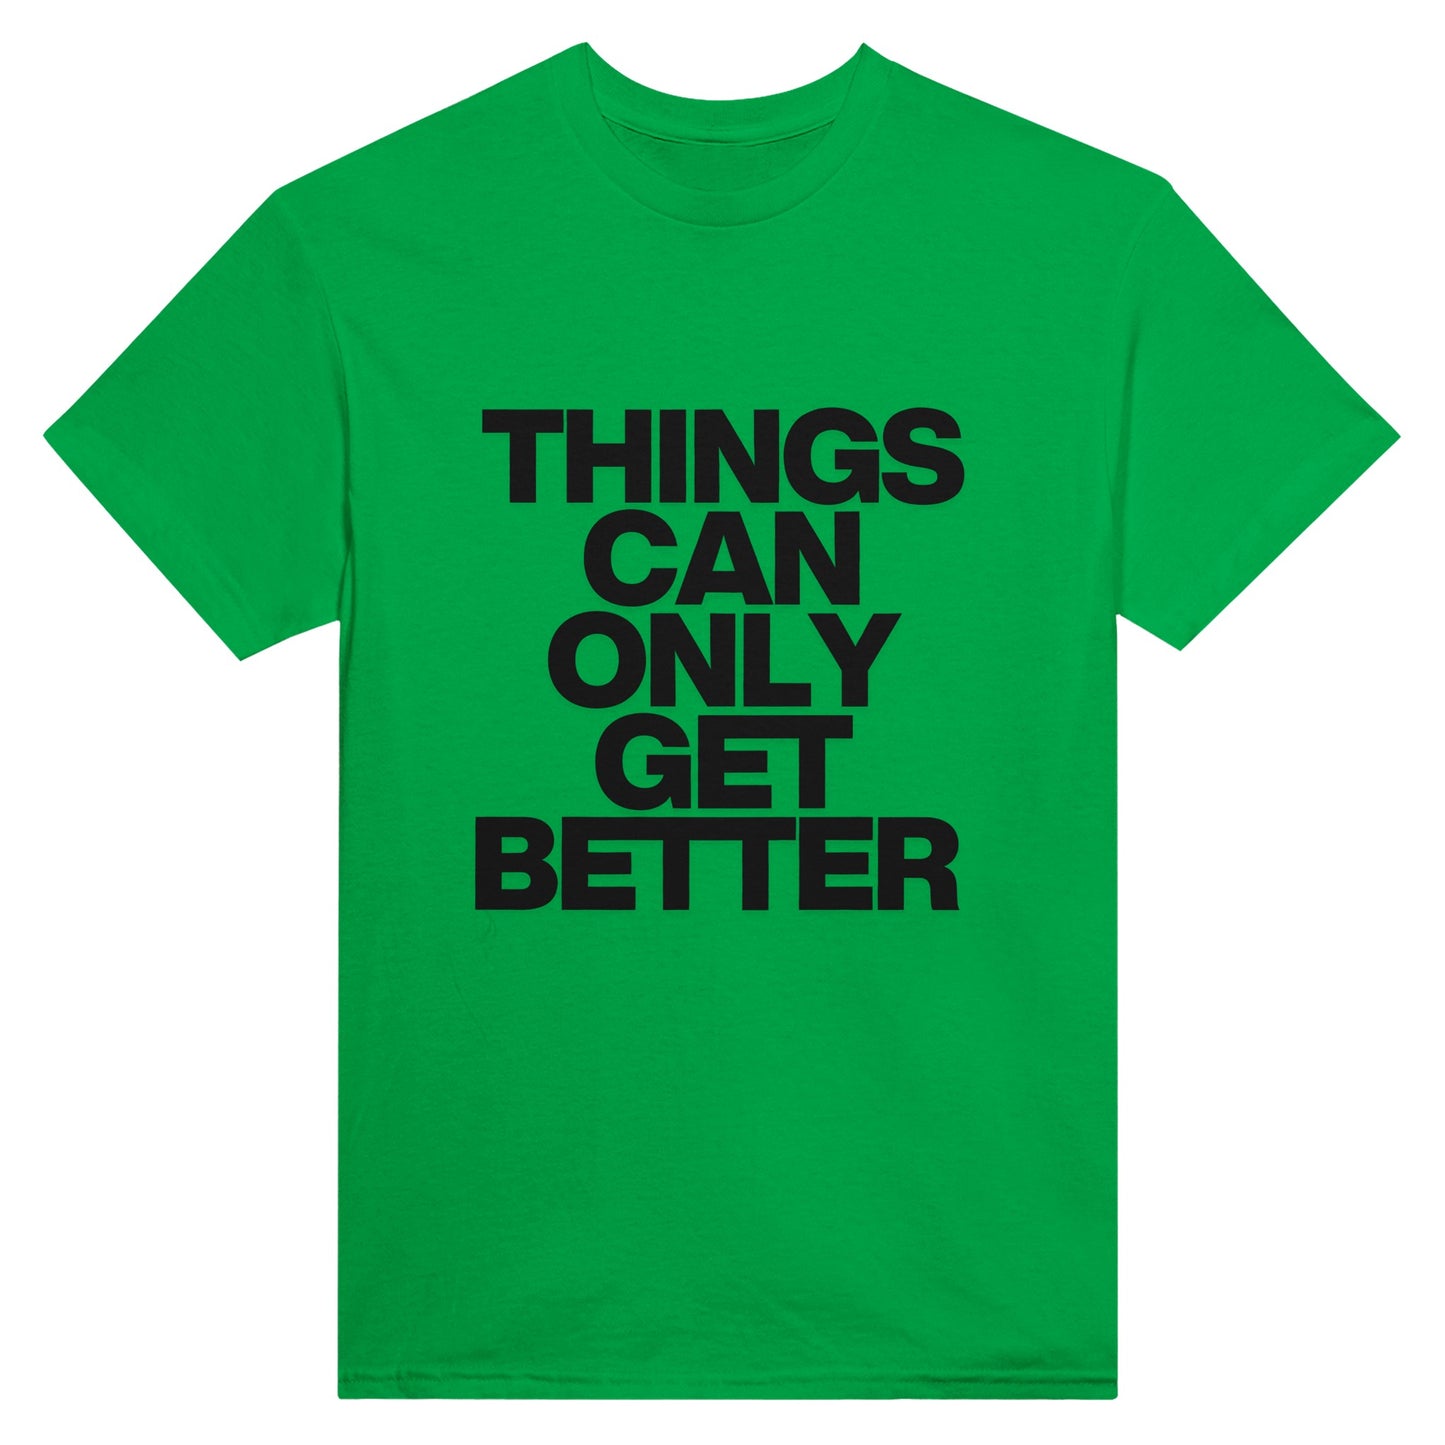 Things Can Only Get Better T-shirt in green - anti-tory election wear